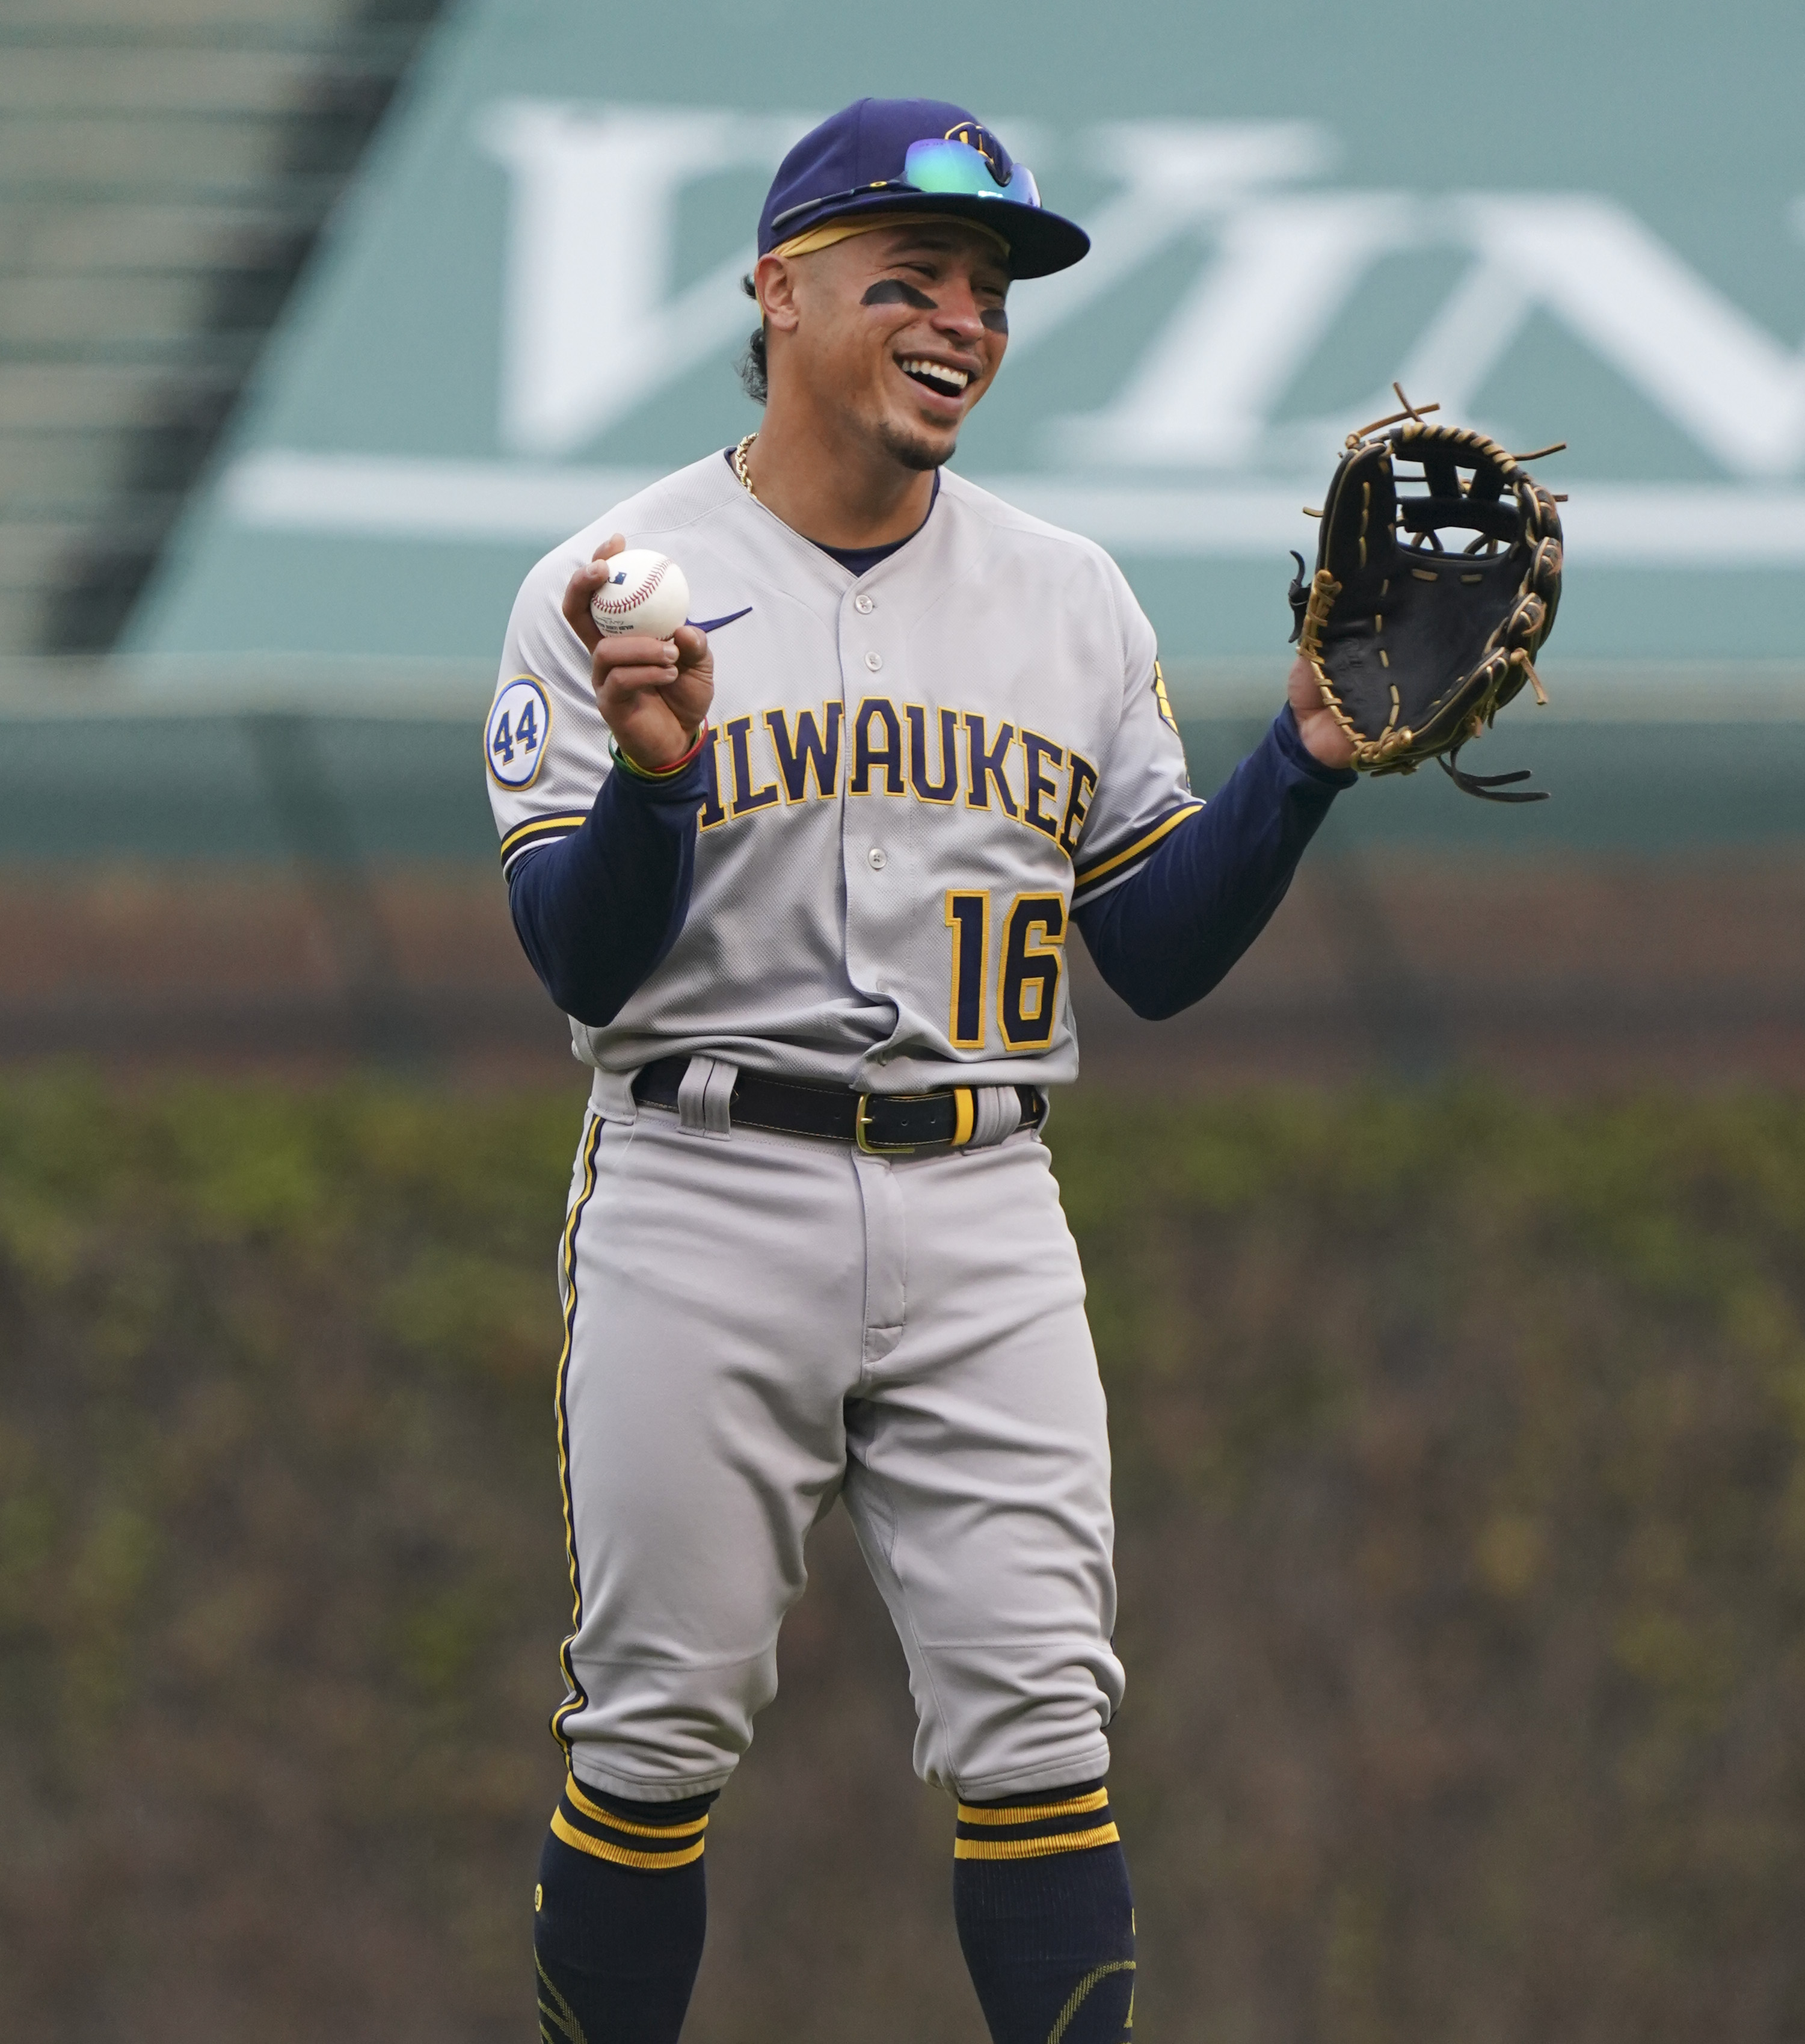 Mariners get 2B Kolten Wong from Brewers for Winker, Toro